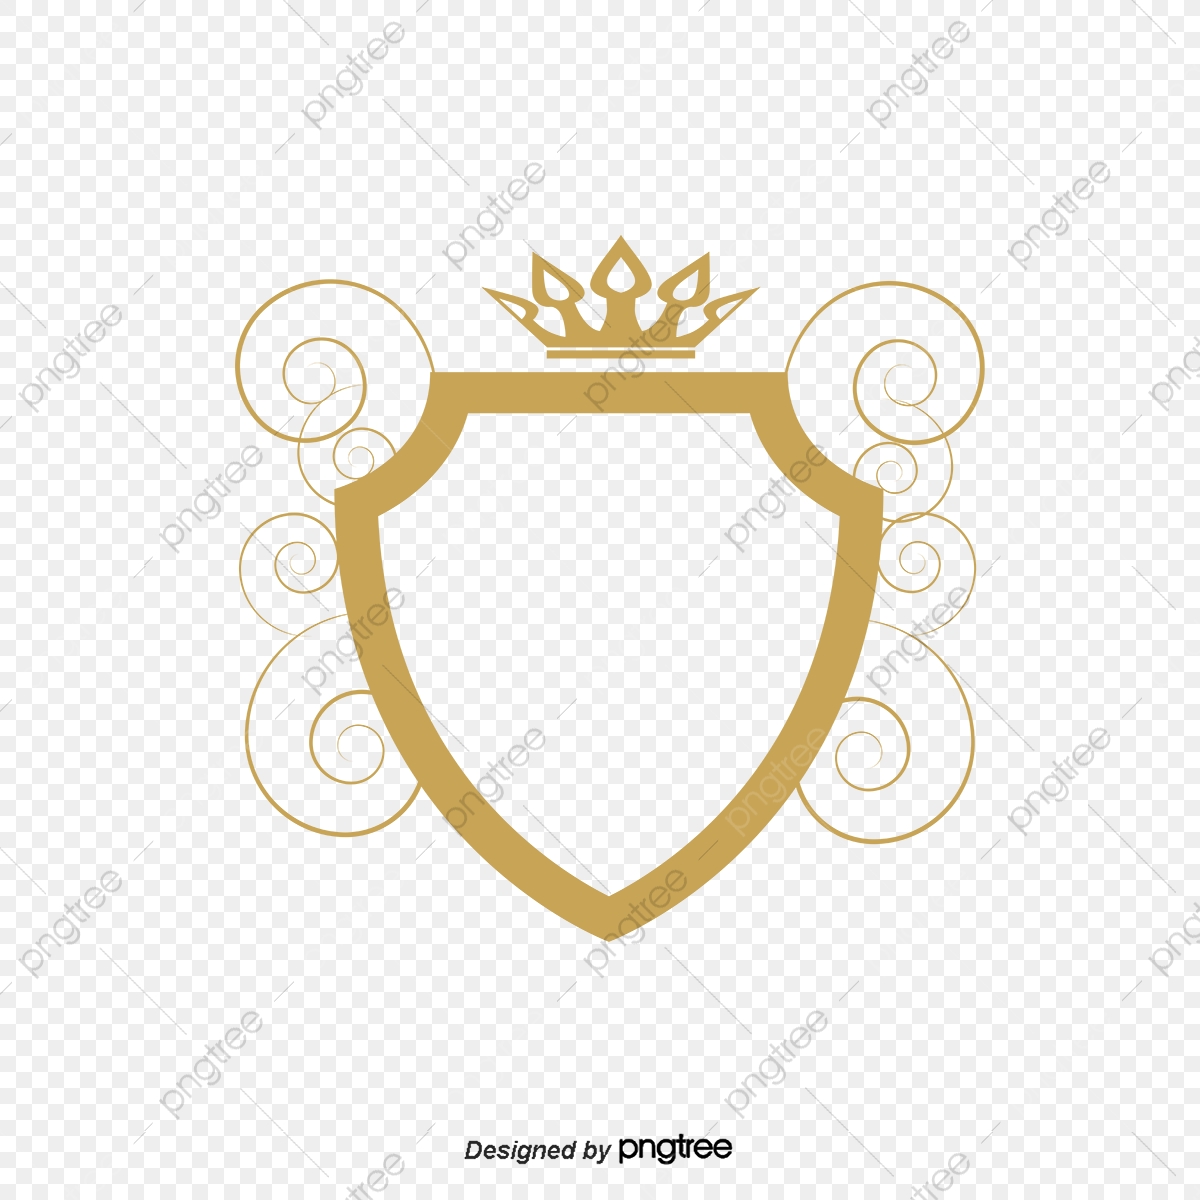 Shaped Yellow Crown Frame Picture, Crown Clipart, Frame Clipart.